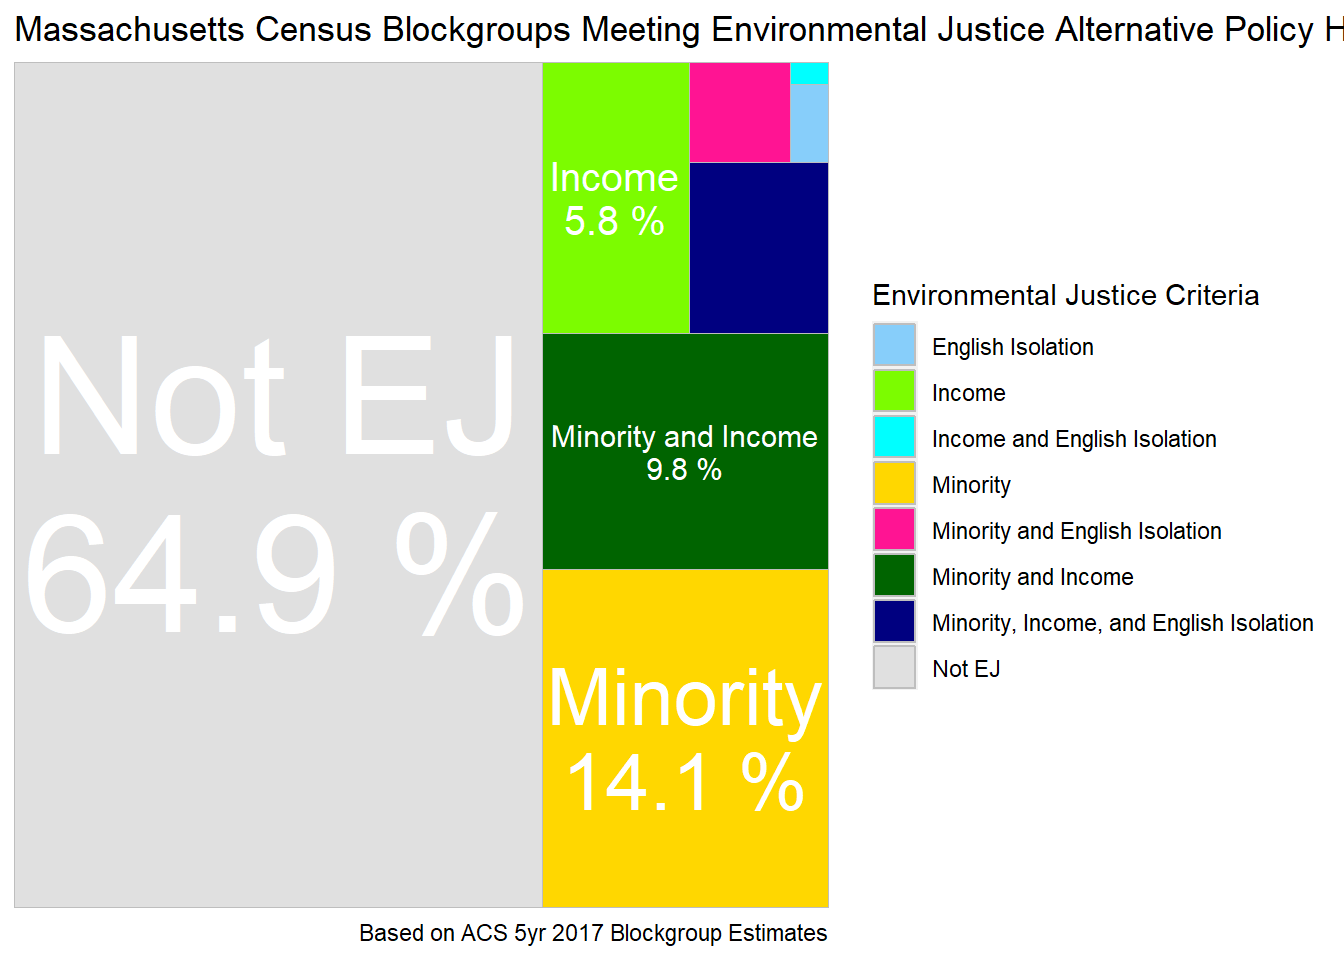 Tree map of block groups classified as environmental justice by Environmental Justice Alternative Policy H - Modify Minority30 Criteria by Income150.